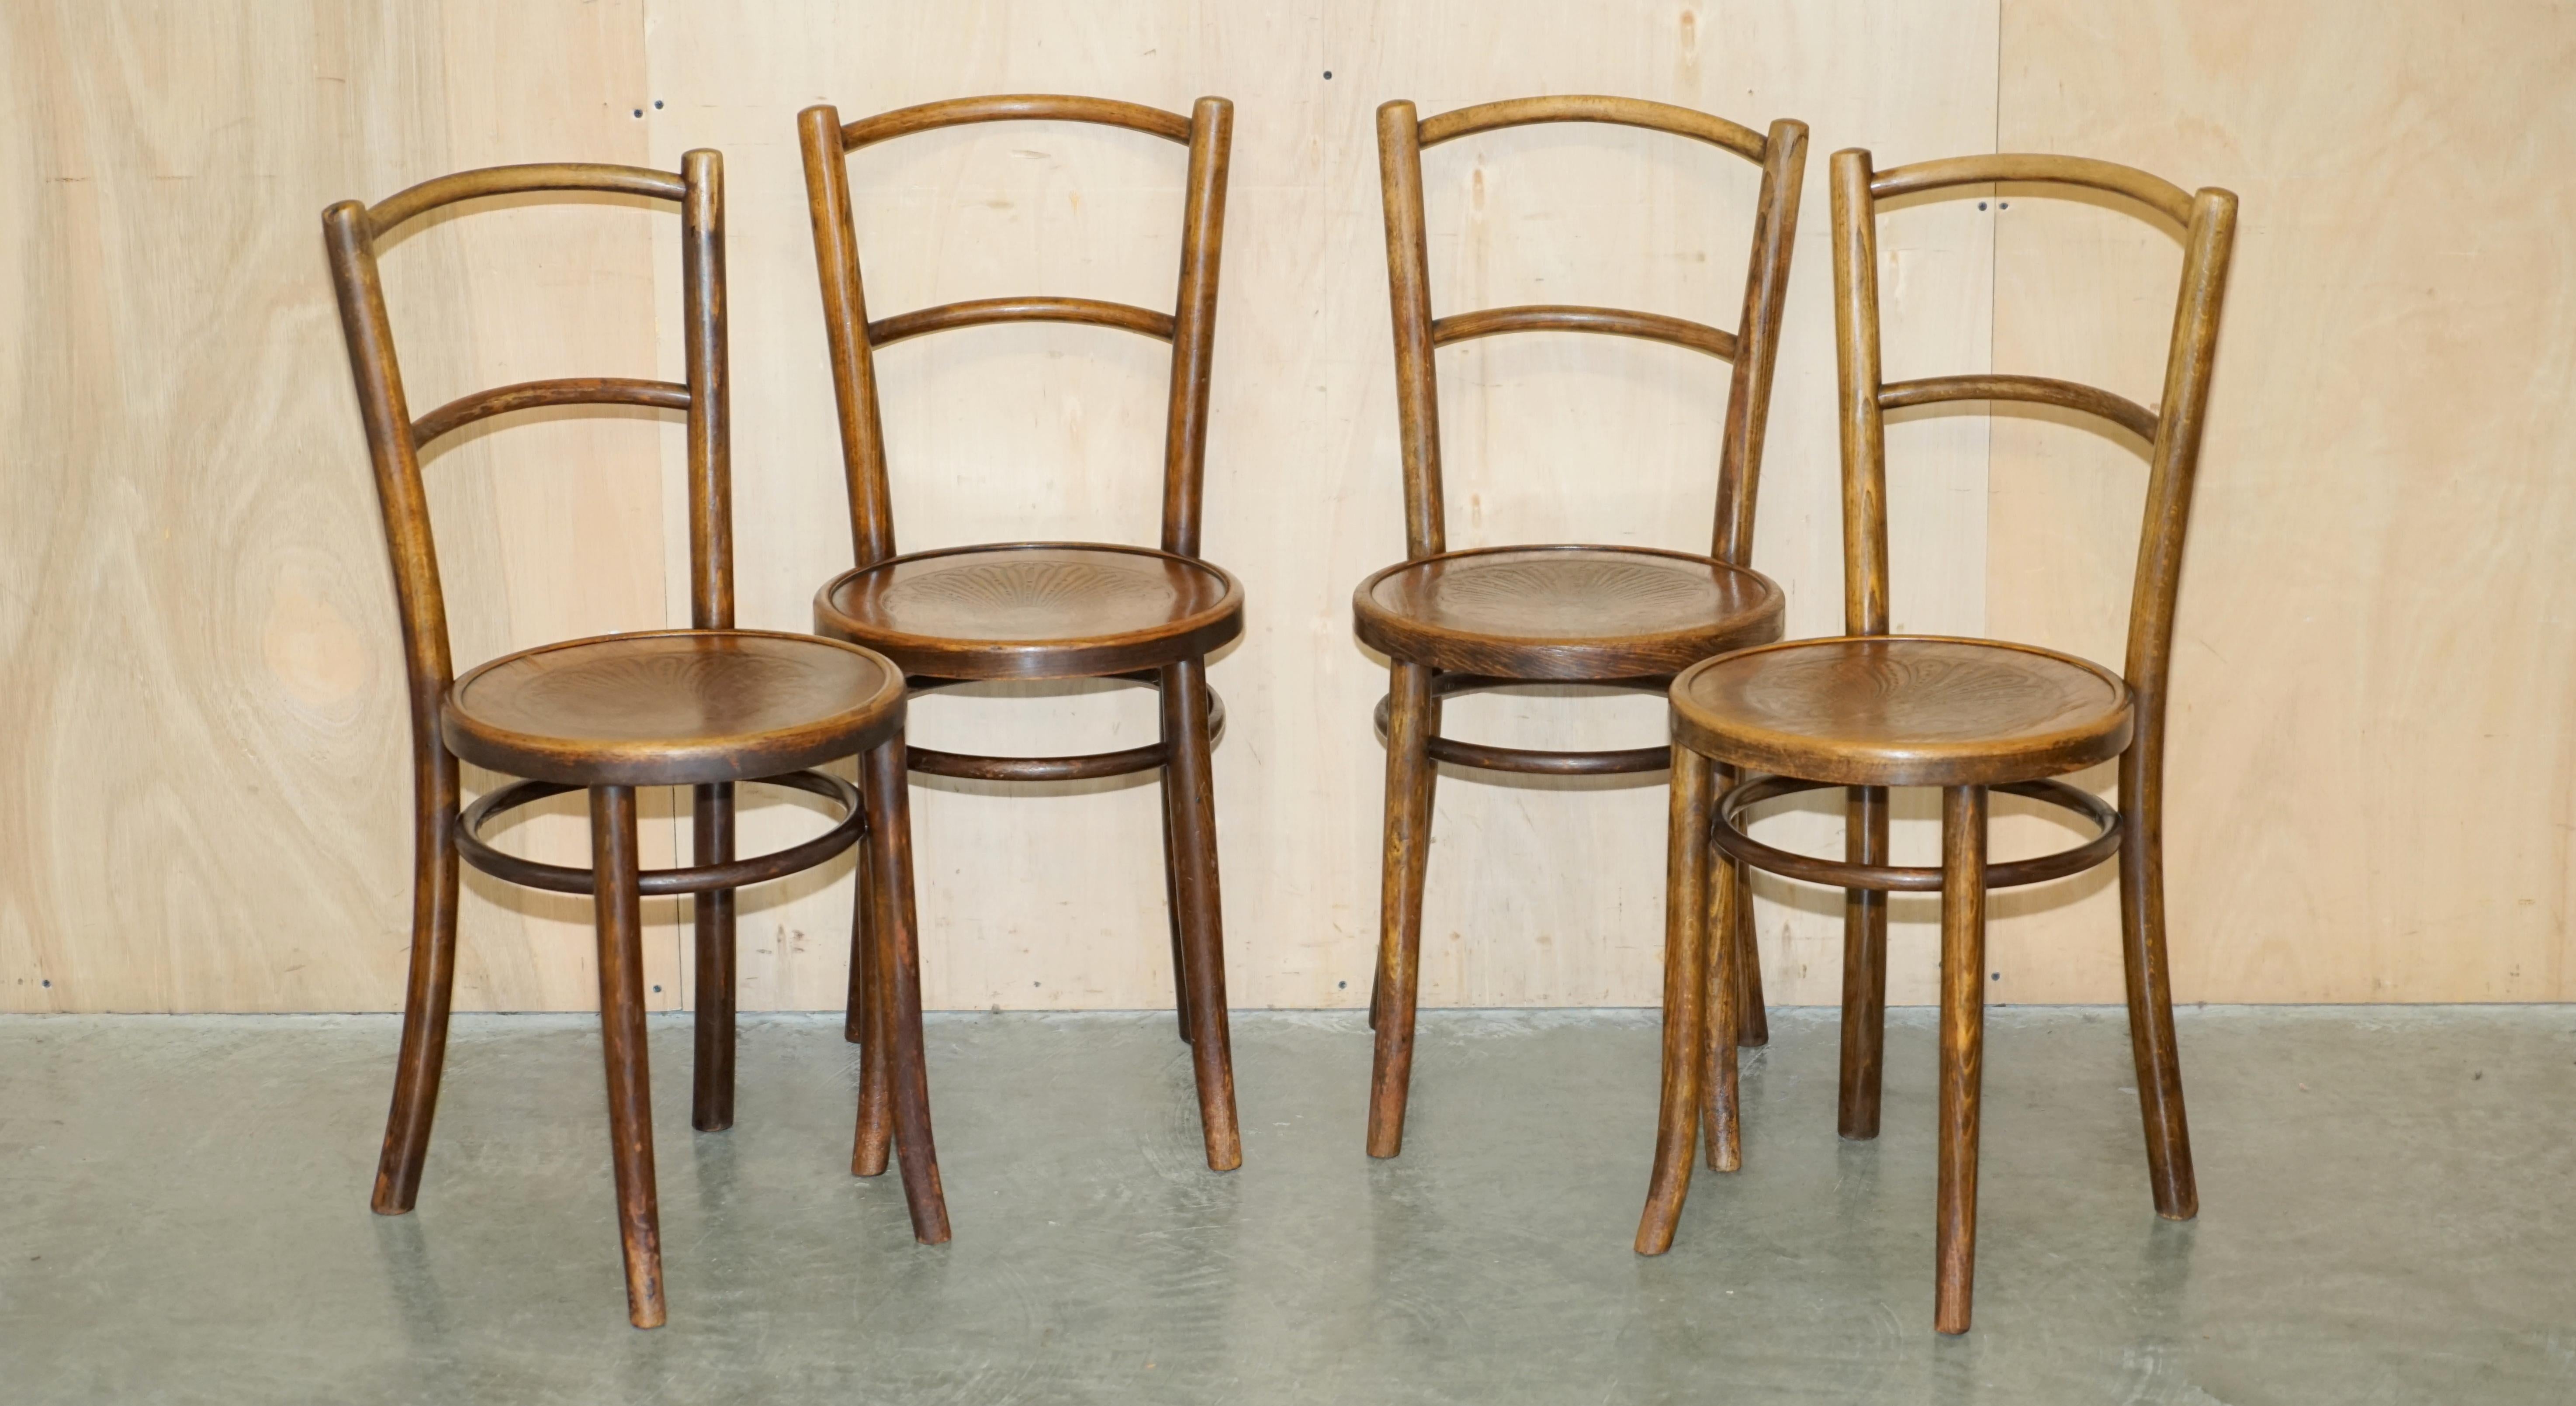 Royal House Antiques

Royal House Antiques is delighted to offer for sale this lovely suite of four original Austrian Thonet Bentwood cafe bistro dining chairs Circa 1930's

Please note the delivery fee listed is just a guide, it covers within the